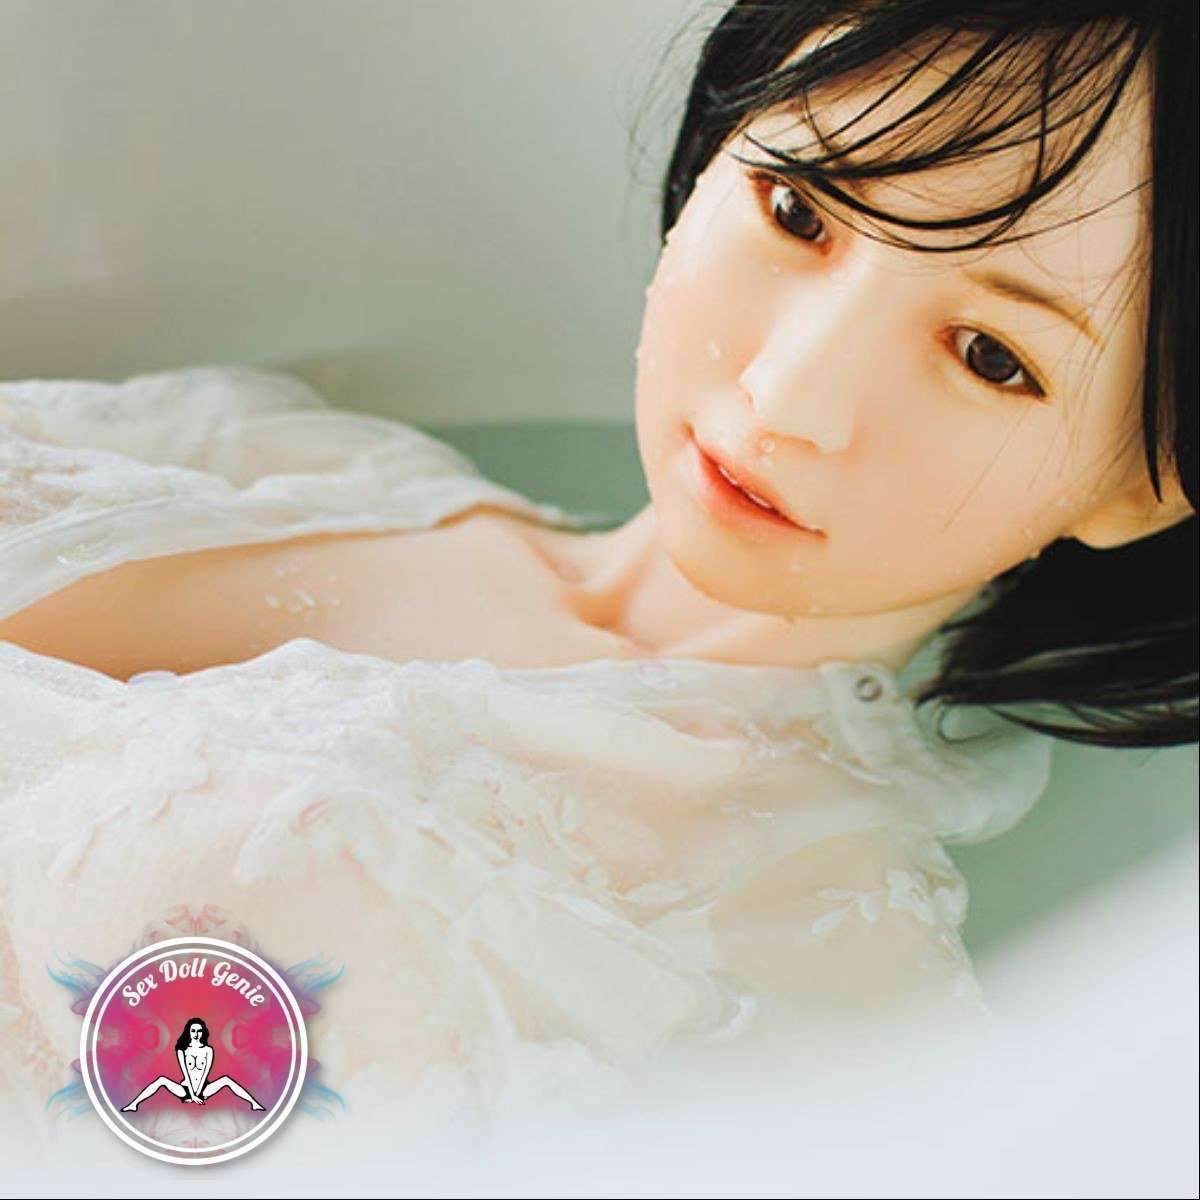 DS Doll - 158Plus - Nanase Head - Type 1 D Cup Silicone Doll-18